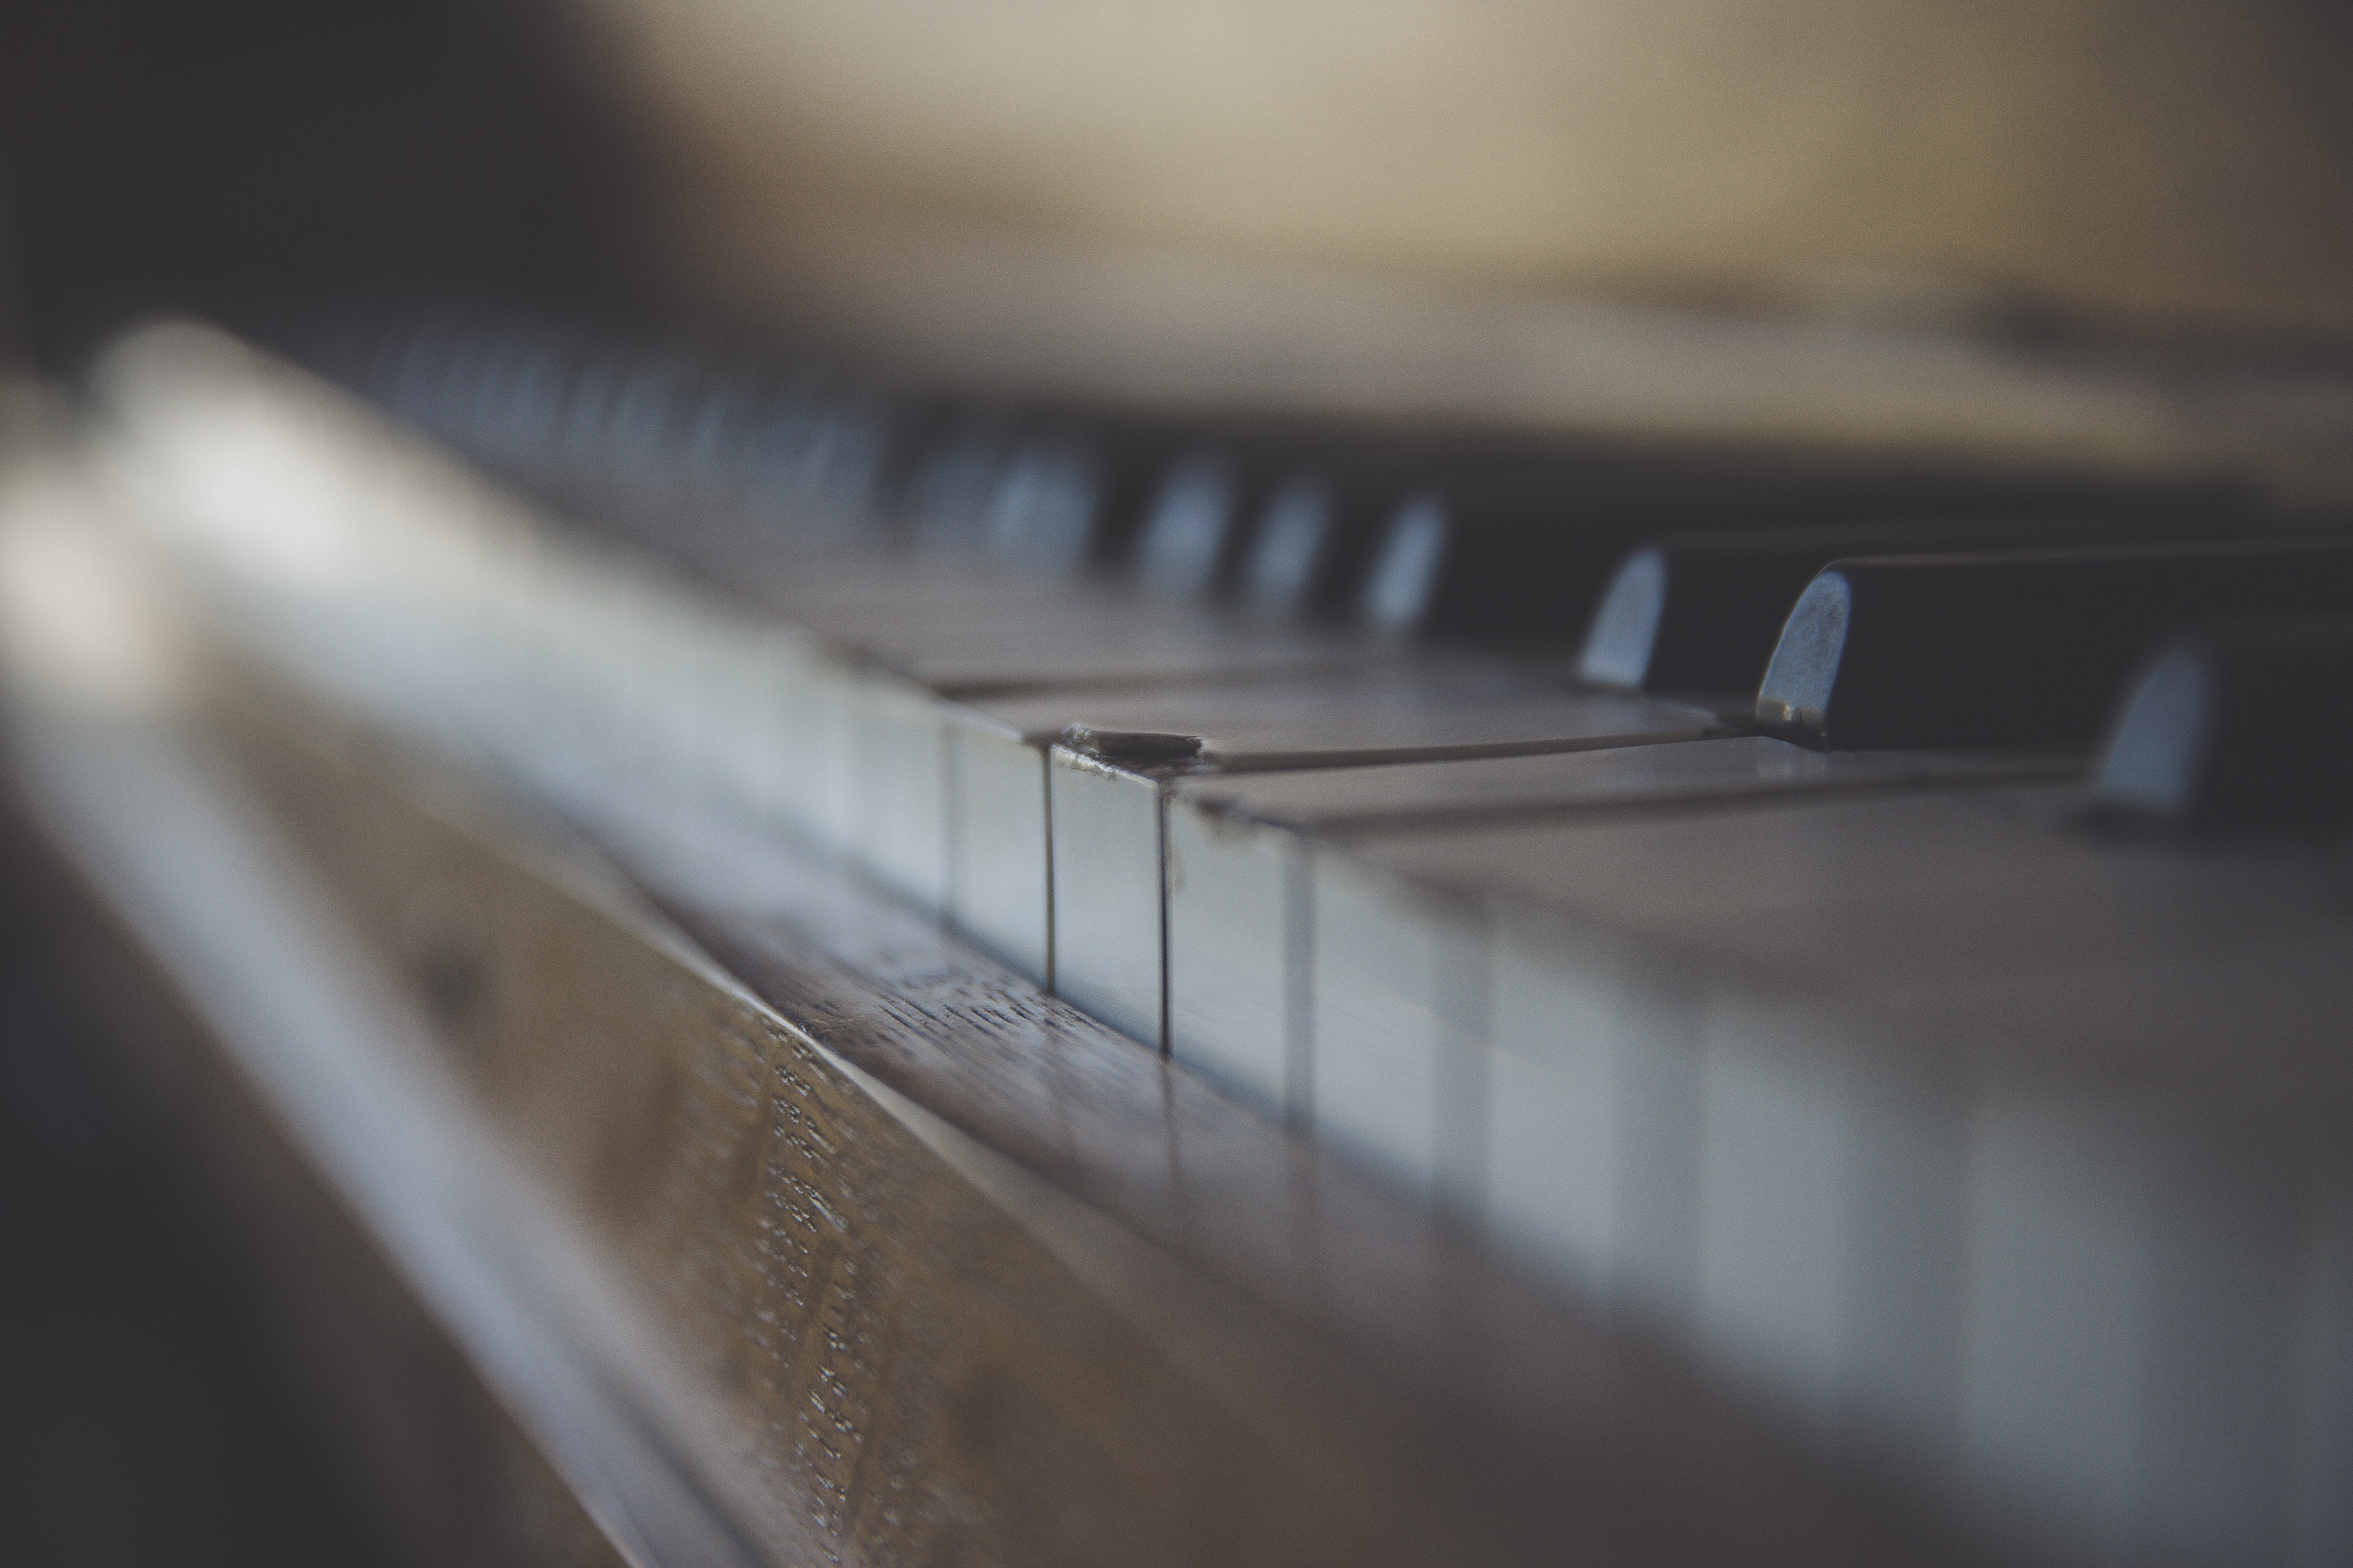 A photo showing the keyboard of a piano close up revealing one of the ivories keys to be cracked.